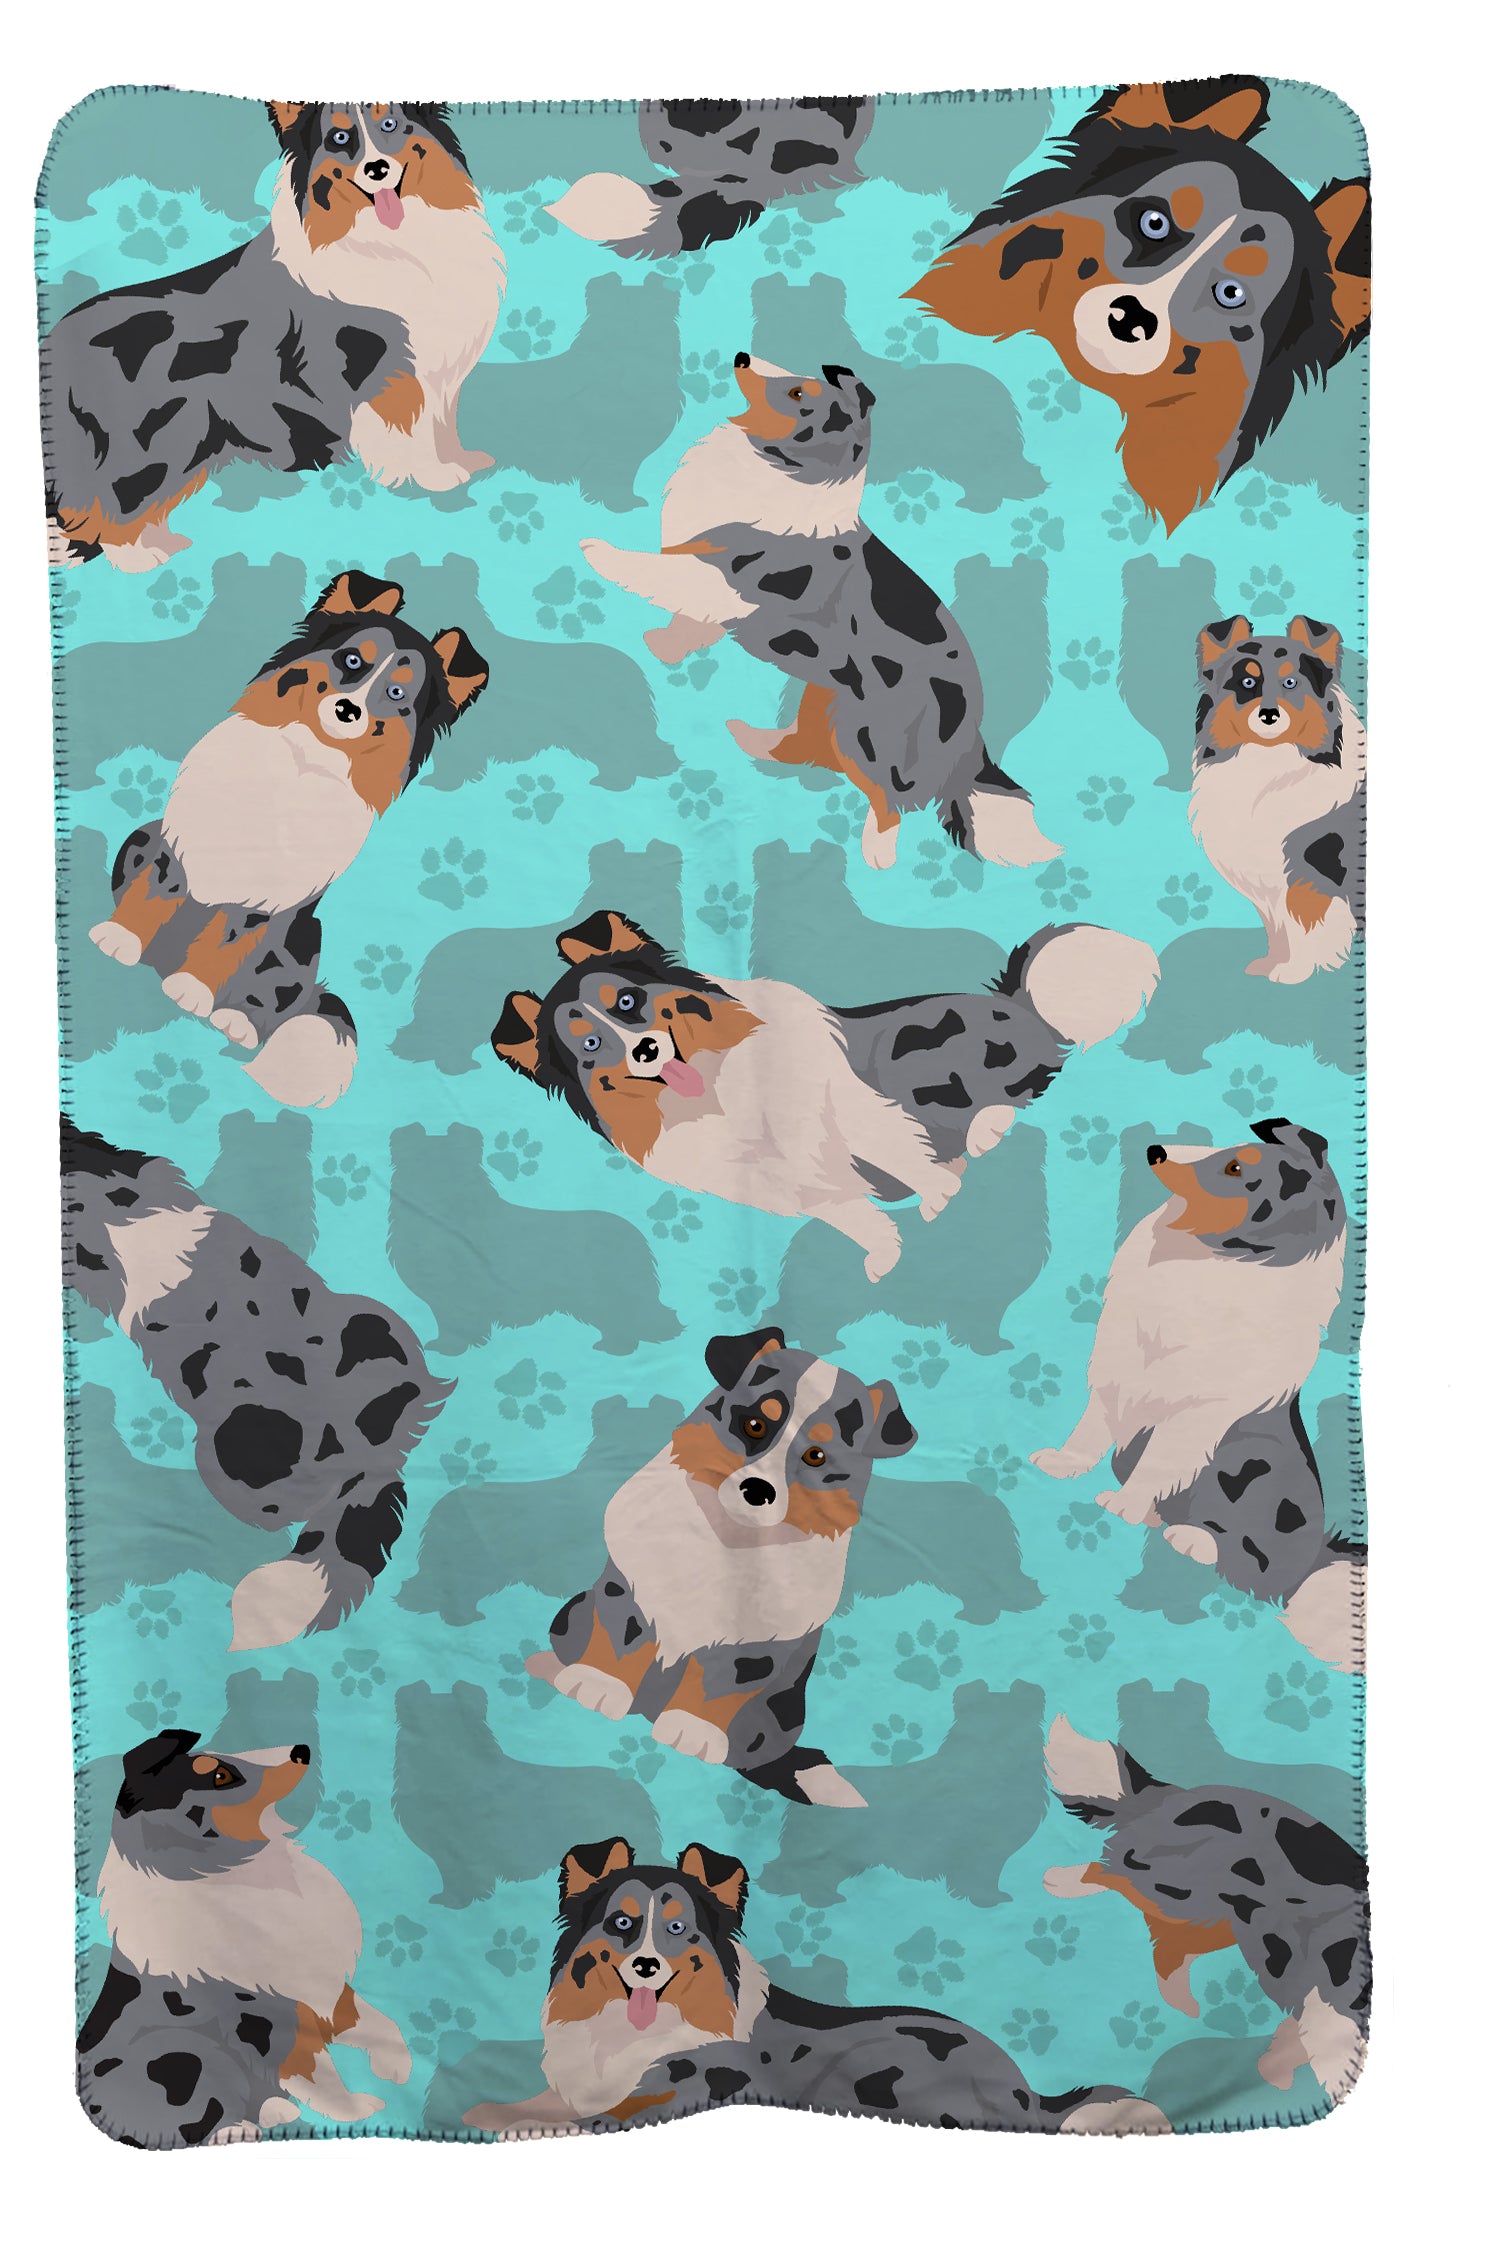 Buy this Blue Merle Sheltie Soft Travel Blanket with Bag